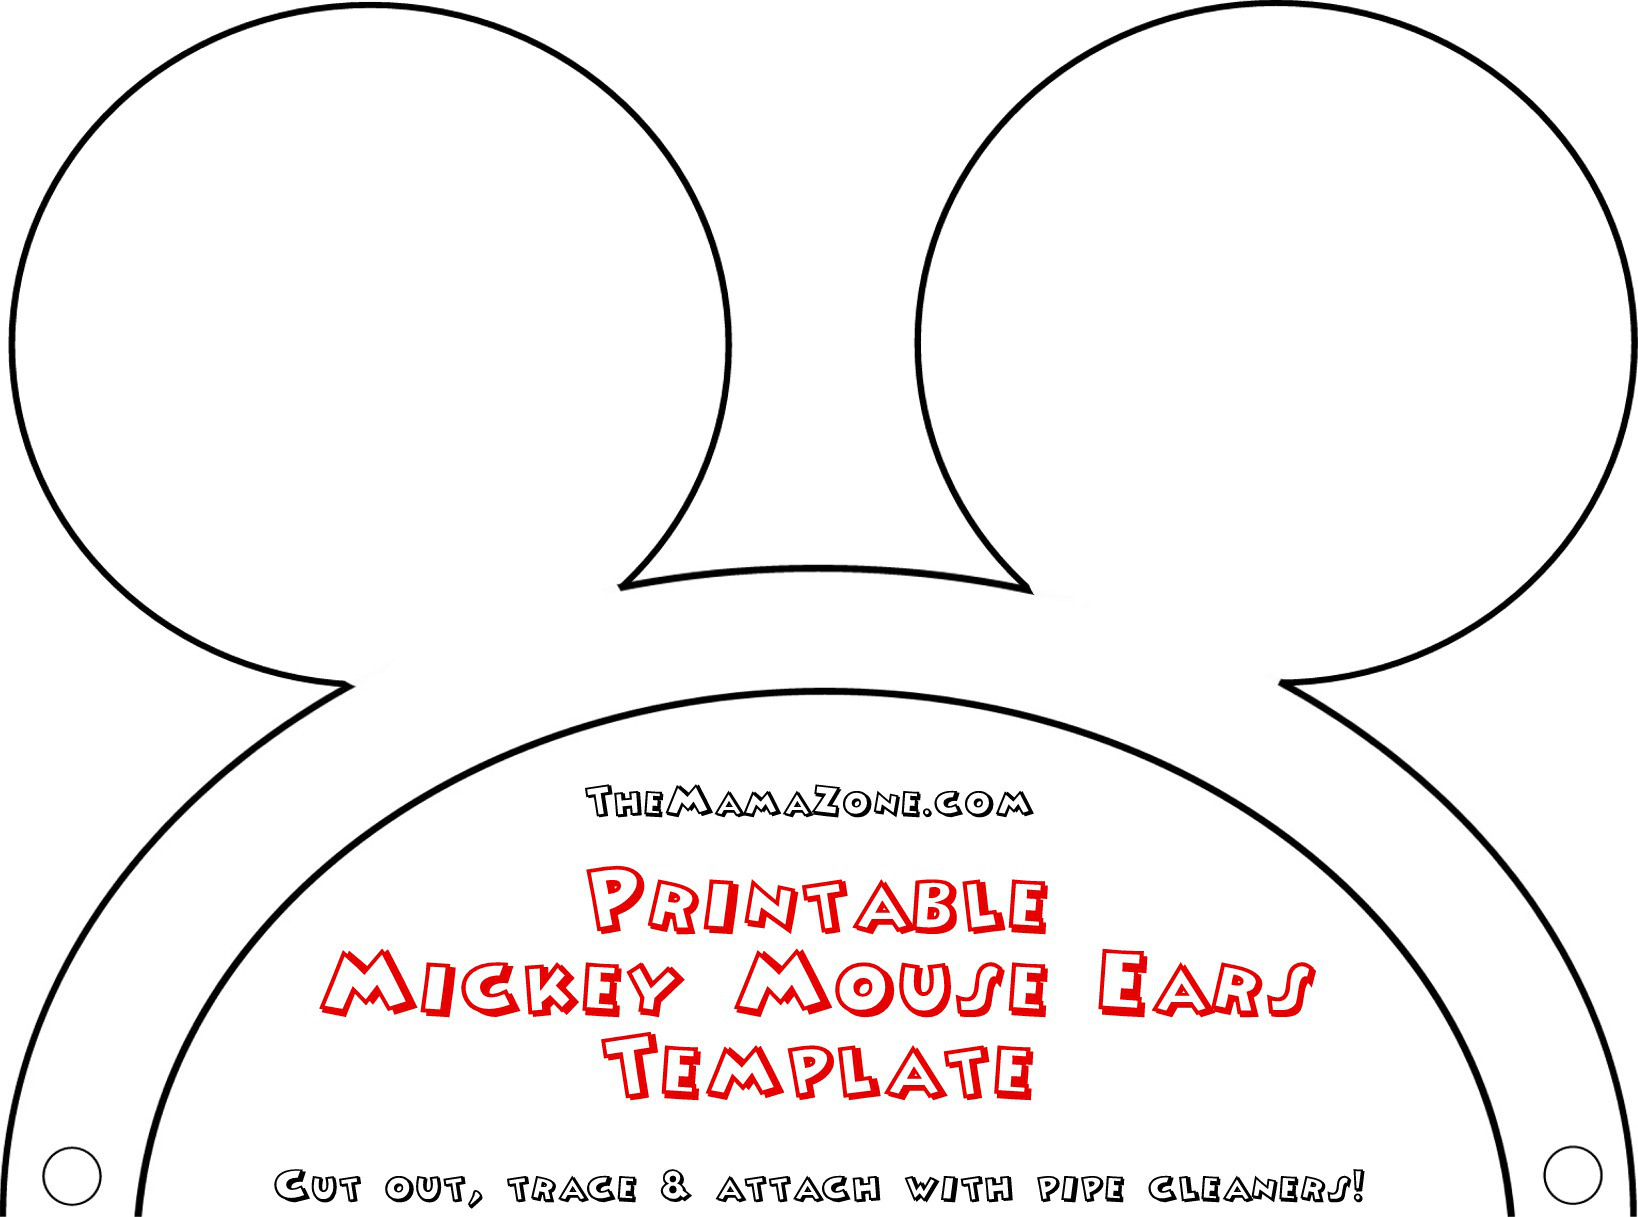 Free Mickey Mouse Ears Template Headband, Download Free Clip Art - Free Printable Minnie Mouse Ears Template